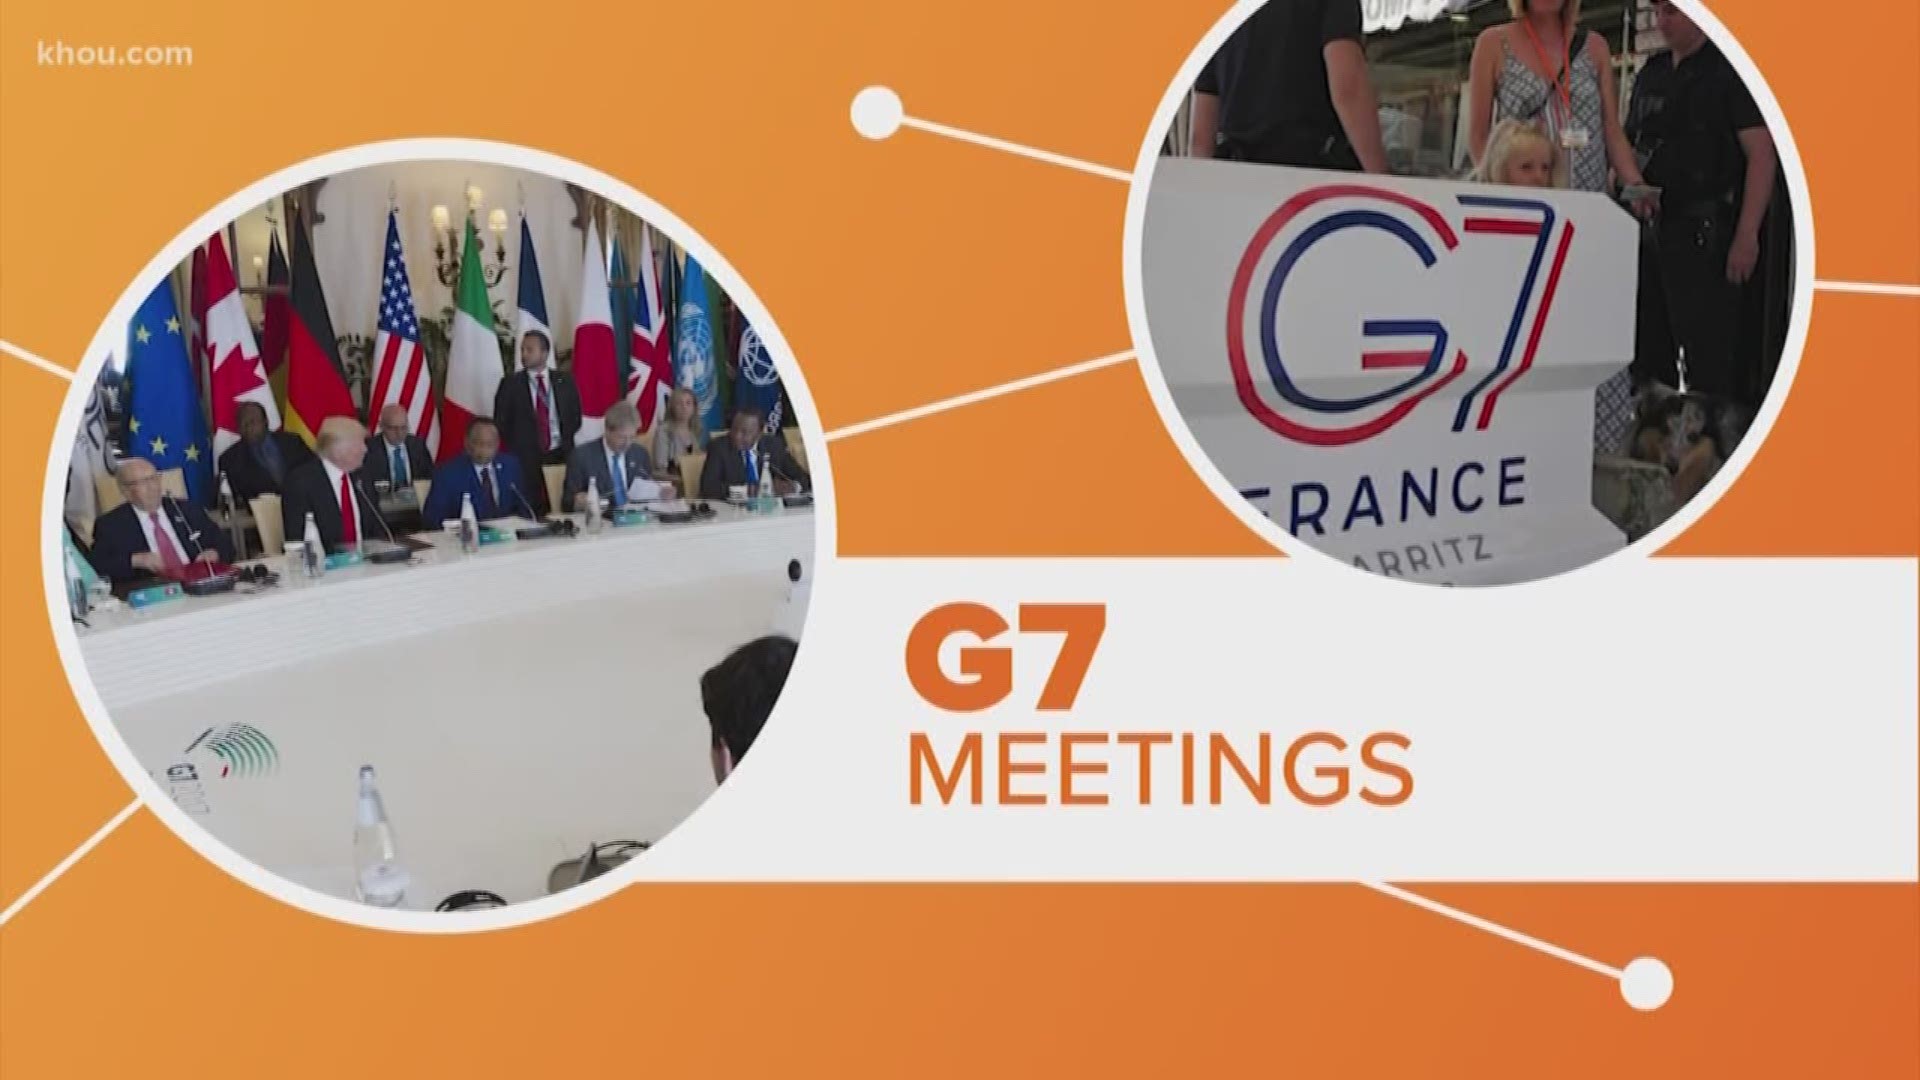 While you were sleeping, President Trump joined world leaders for Day 3 of the G-7 Summit in France. People across the world are watching what happens at the summit. But what exactly is the G-7? Melissa Correa connects the dots.